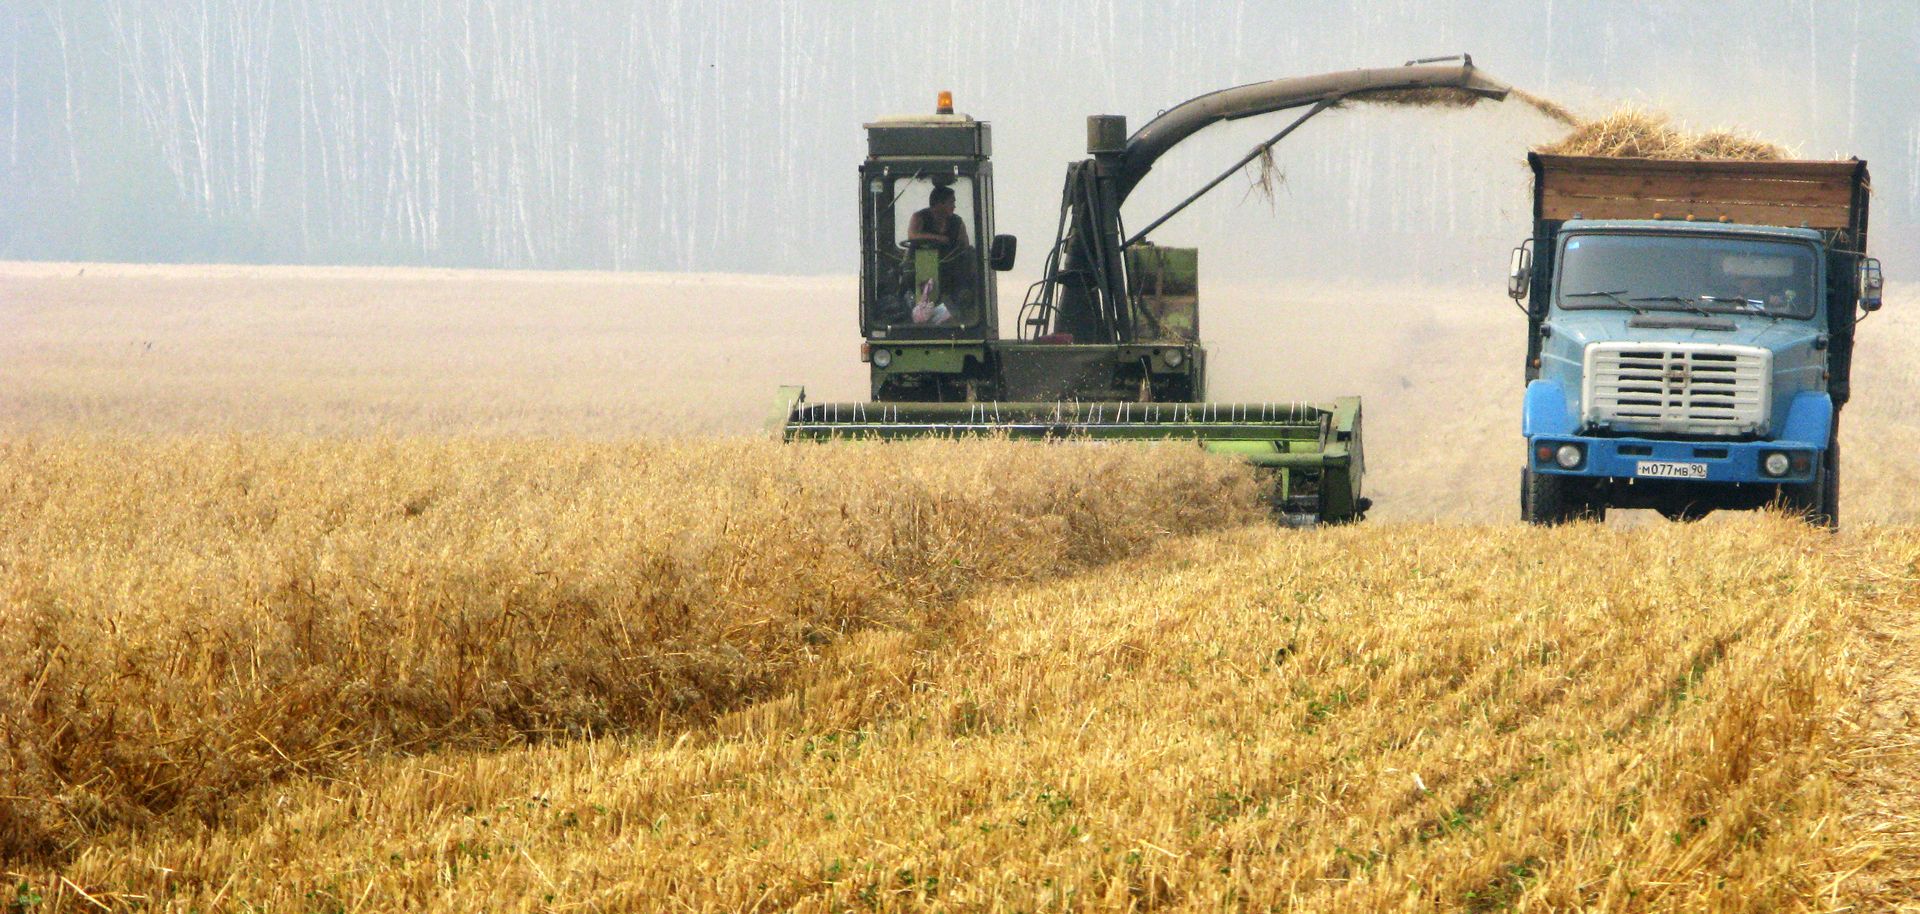 A self-propelled combine harvester on a field near a village south of Moscow on Aug. 15, 2010.